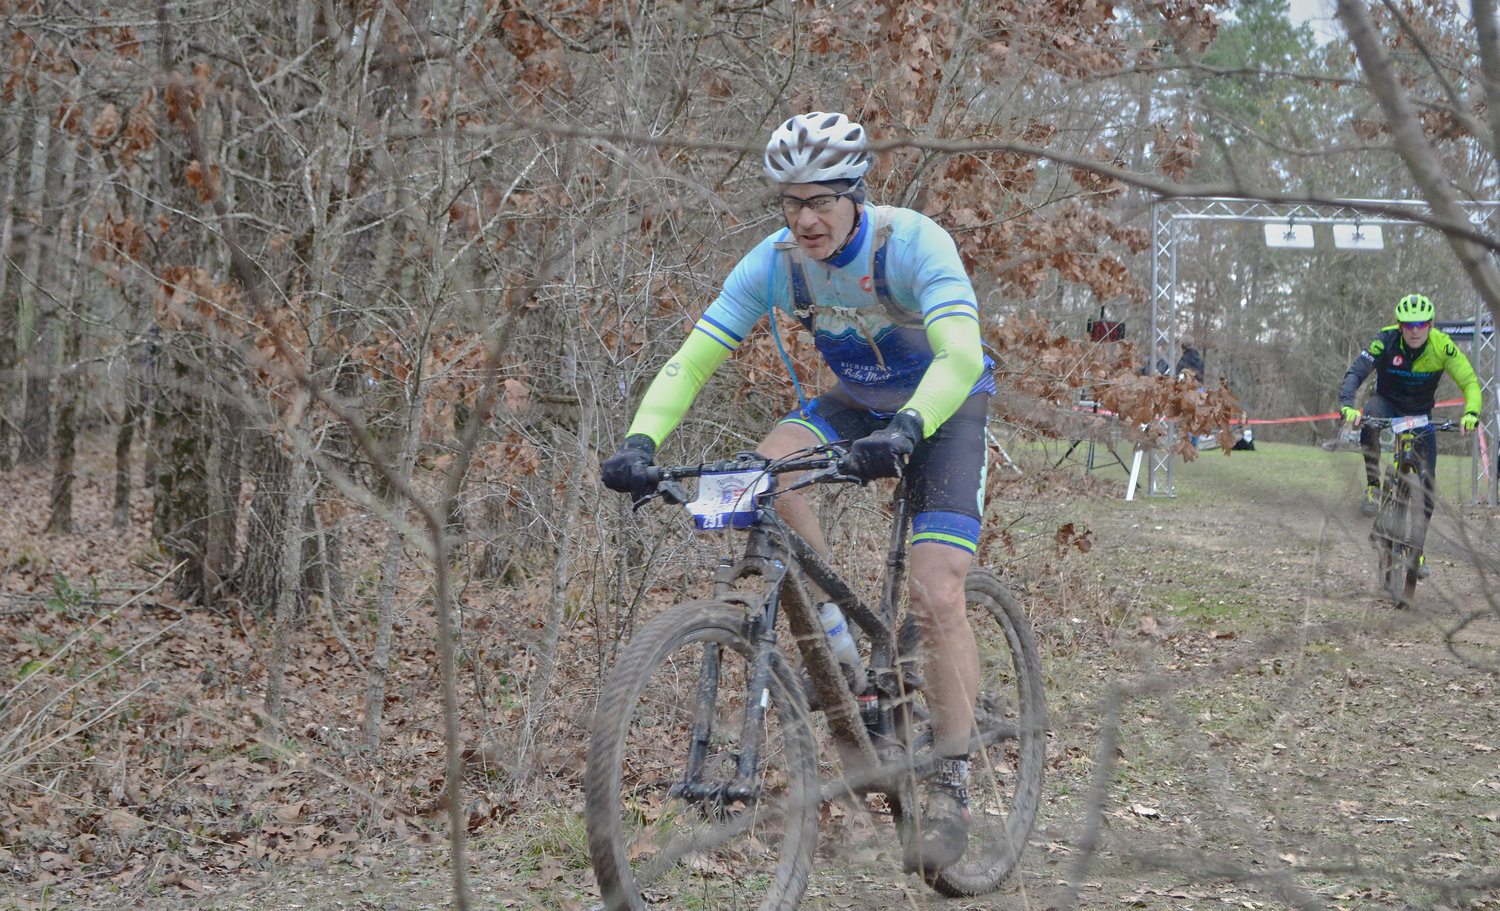 A pair of bicyclists grind out the final 15 minutes of the E150 cycling challenge Sunday at the Mineola Nature Preserve’s mountain biking course.